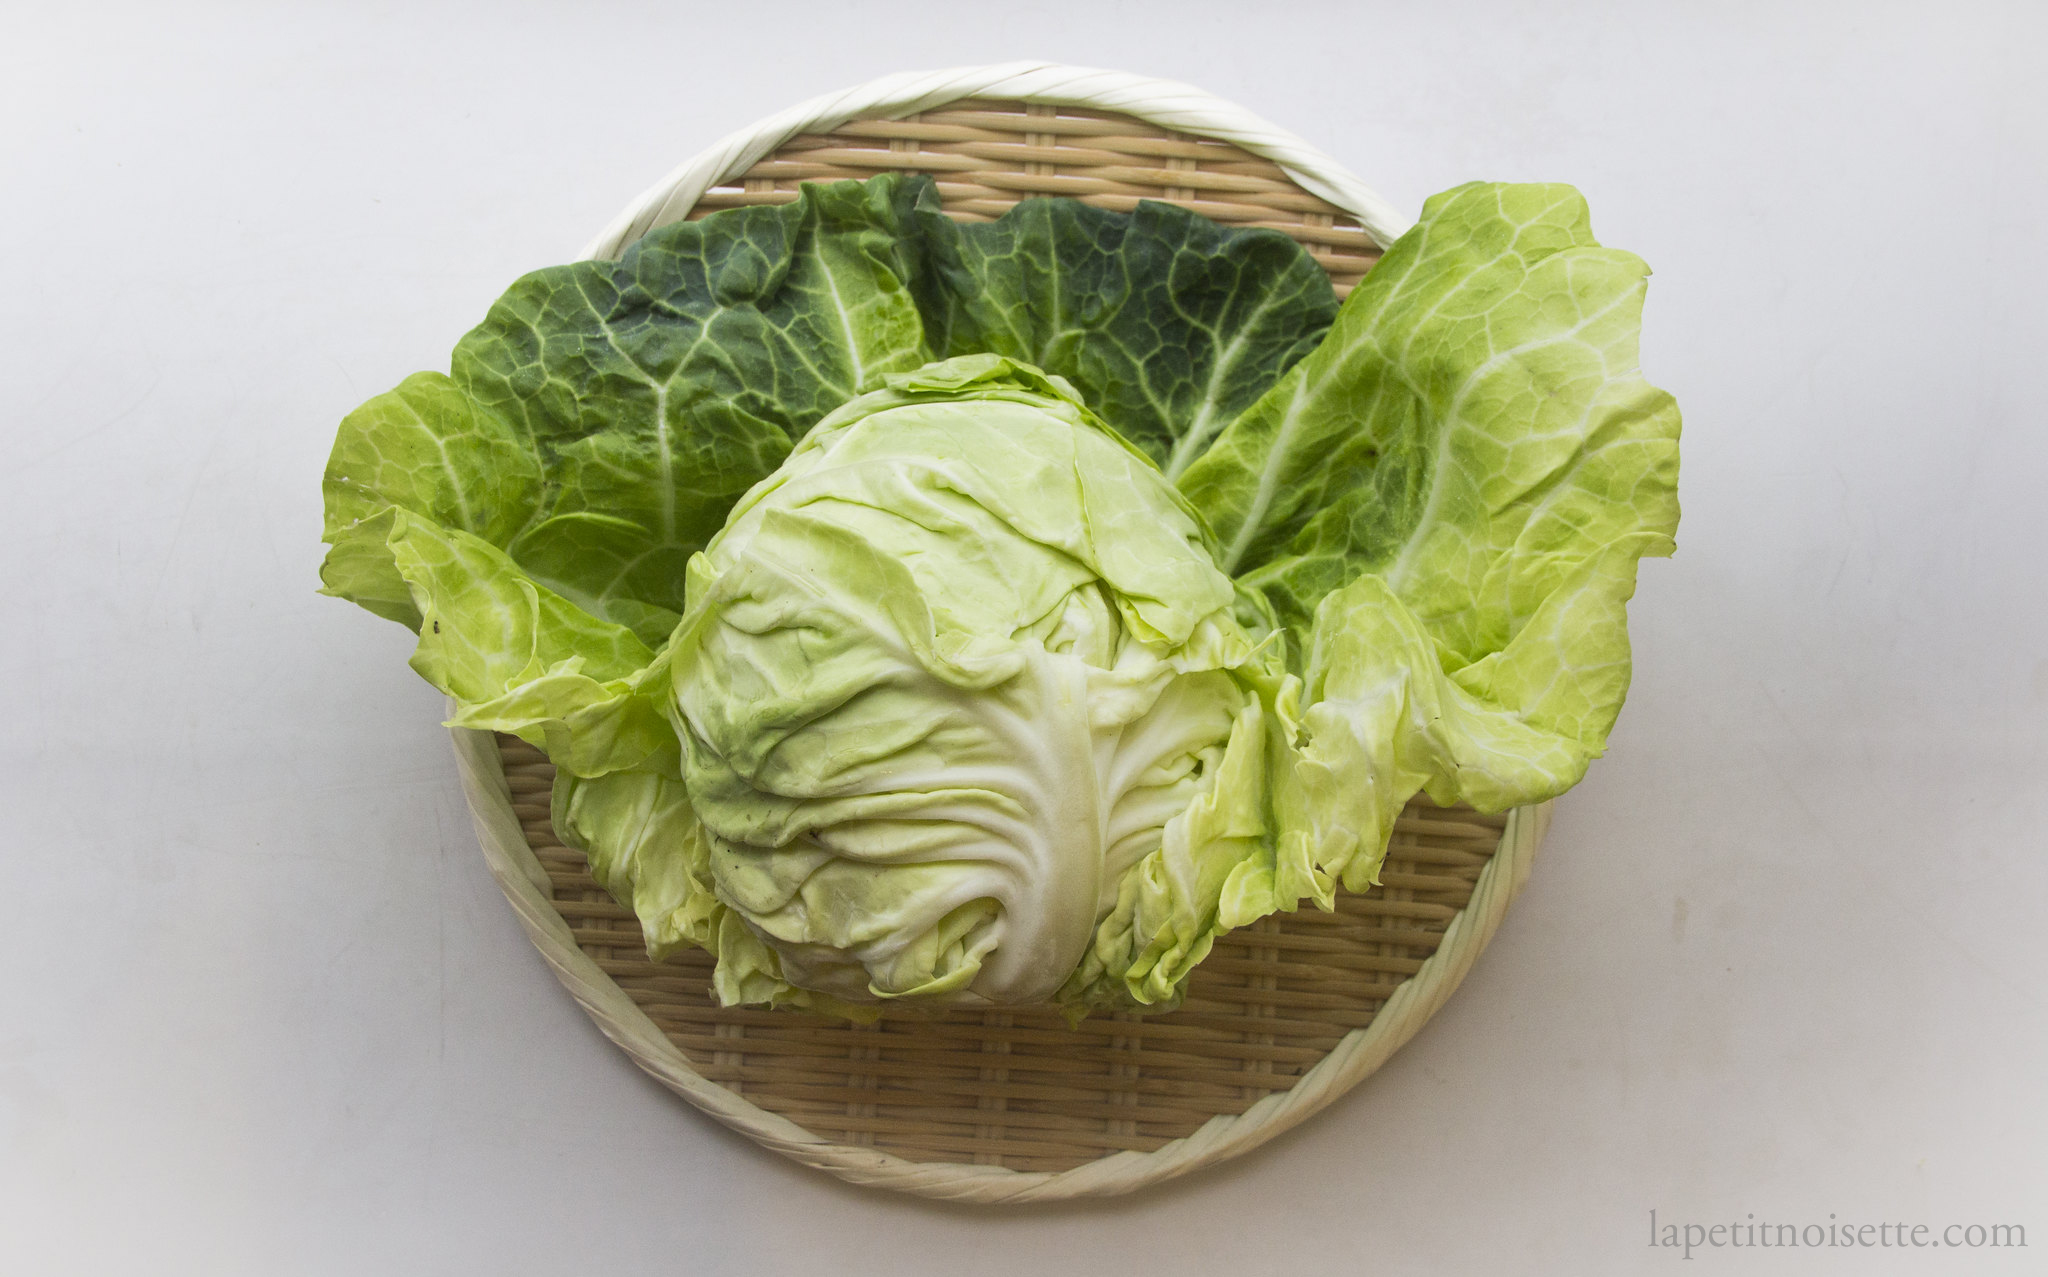 Cabbage for motsunabe.